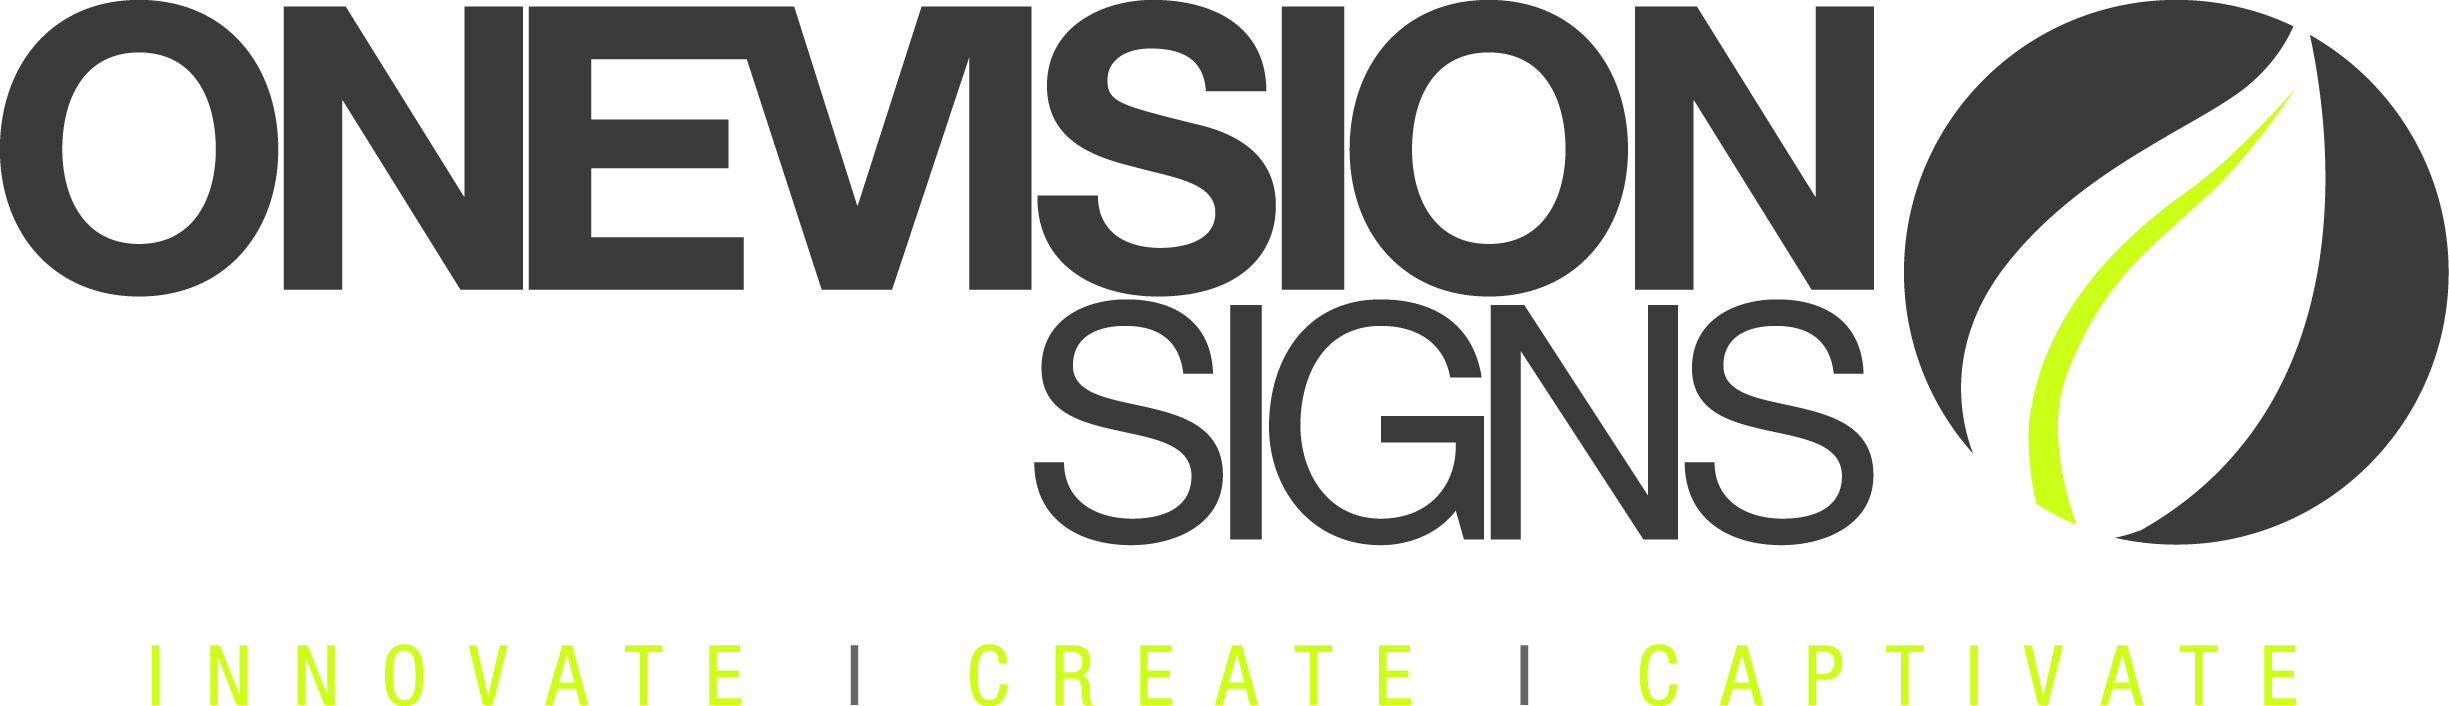 One Vision Signs Ltd